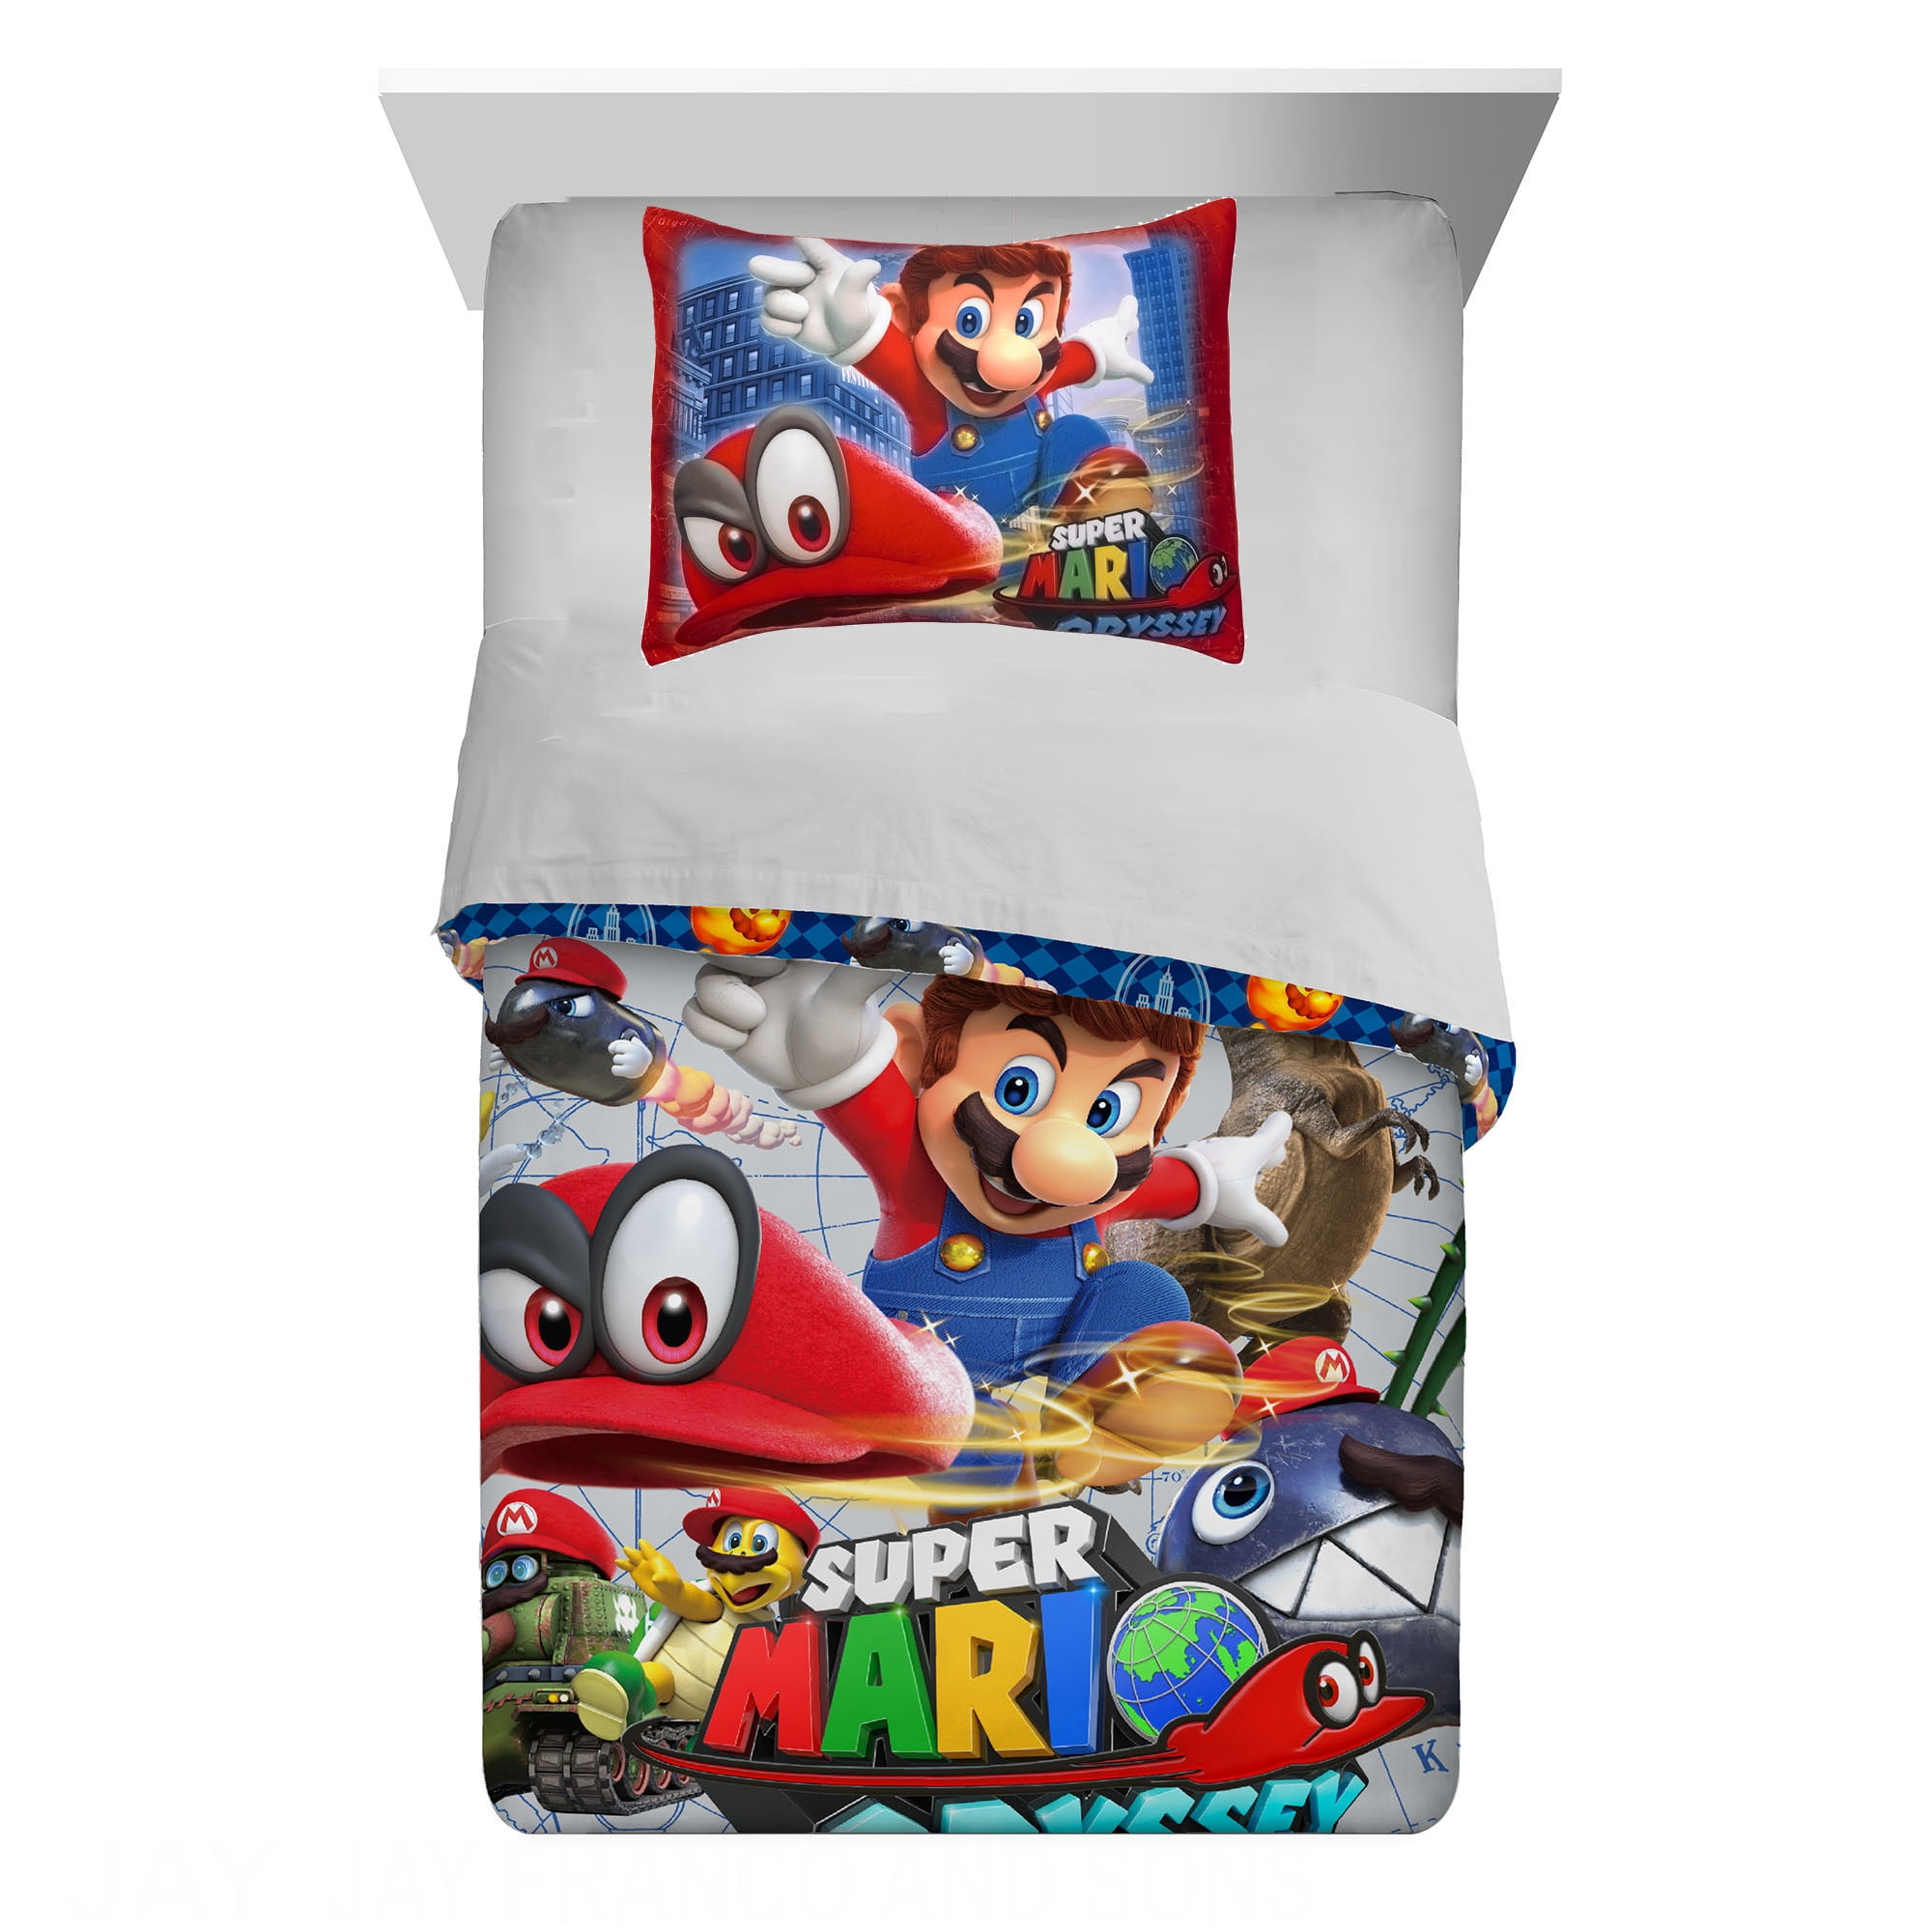 Details about   Super Mario Odyssey Kids Microfiber Bedding Reversible Comforter with Sham T/F 